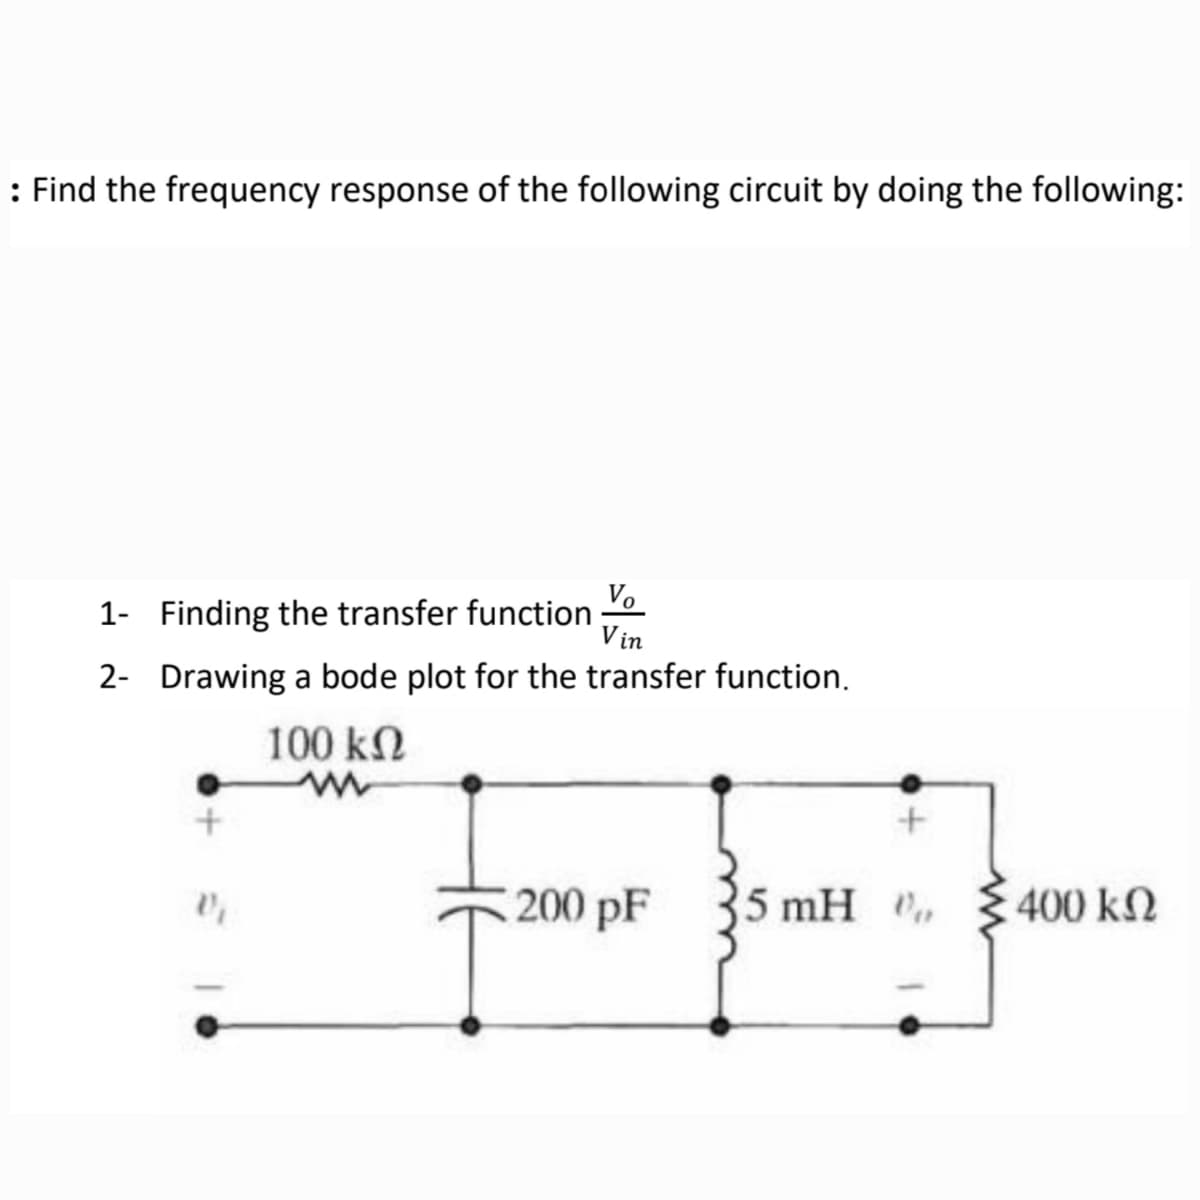 : Find the frequency response of the following circuit by doing the following:
1- Finding the transfer function
Vo
Vin
2- Drawing a bode plot for the transfer function.
100 ΚΩ
w
+
200 pF
25 mH
400 ΚΩ